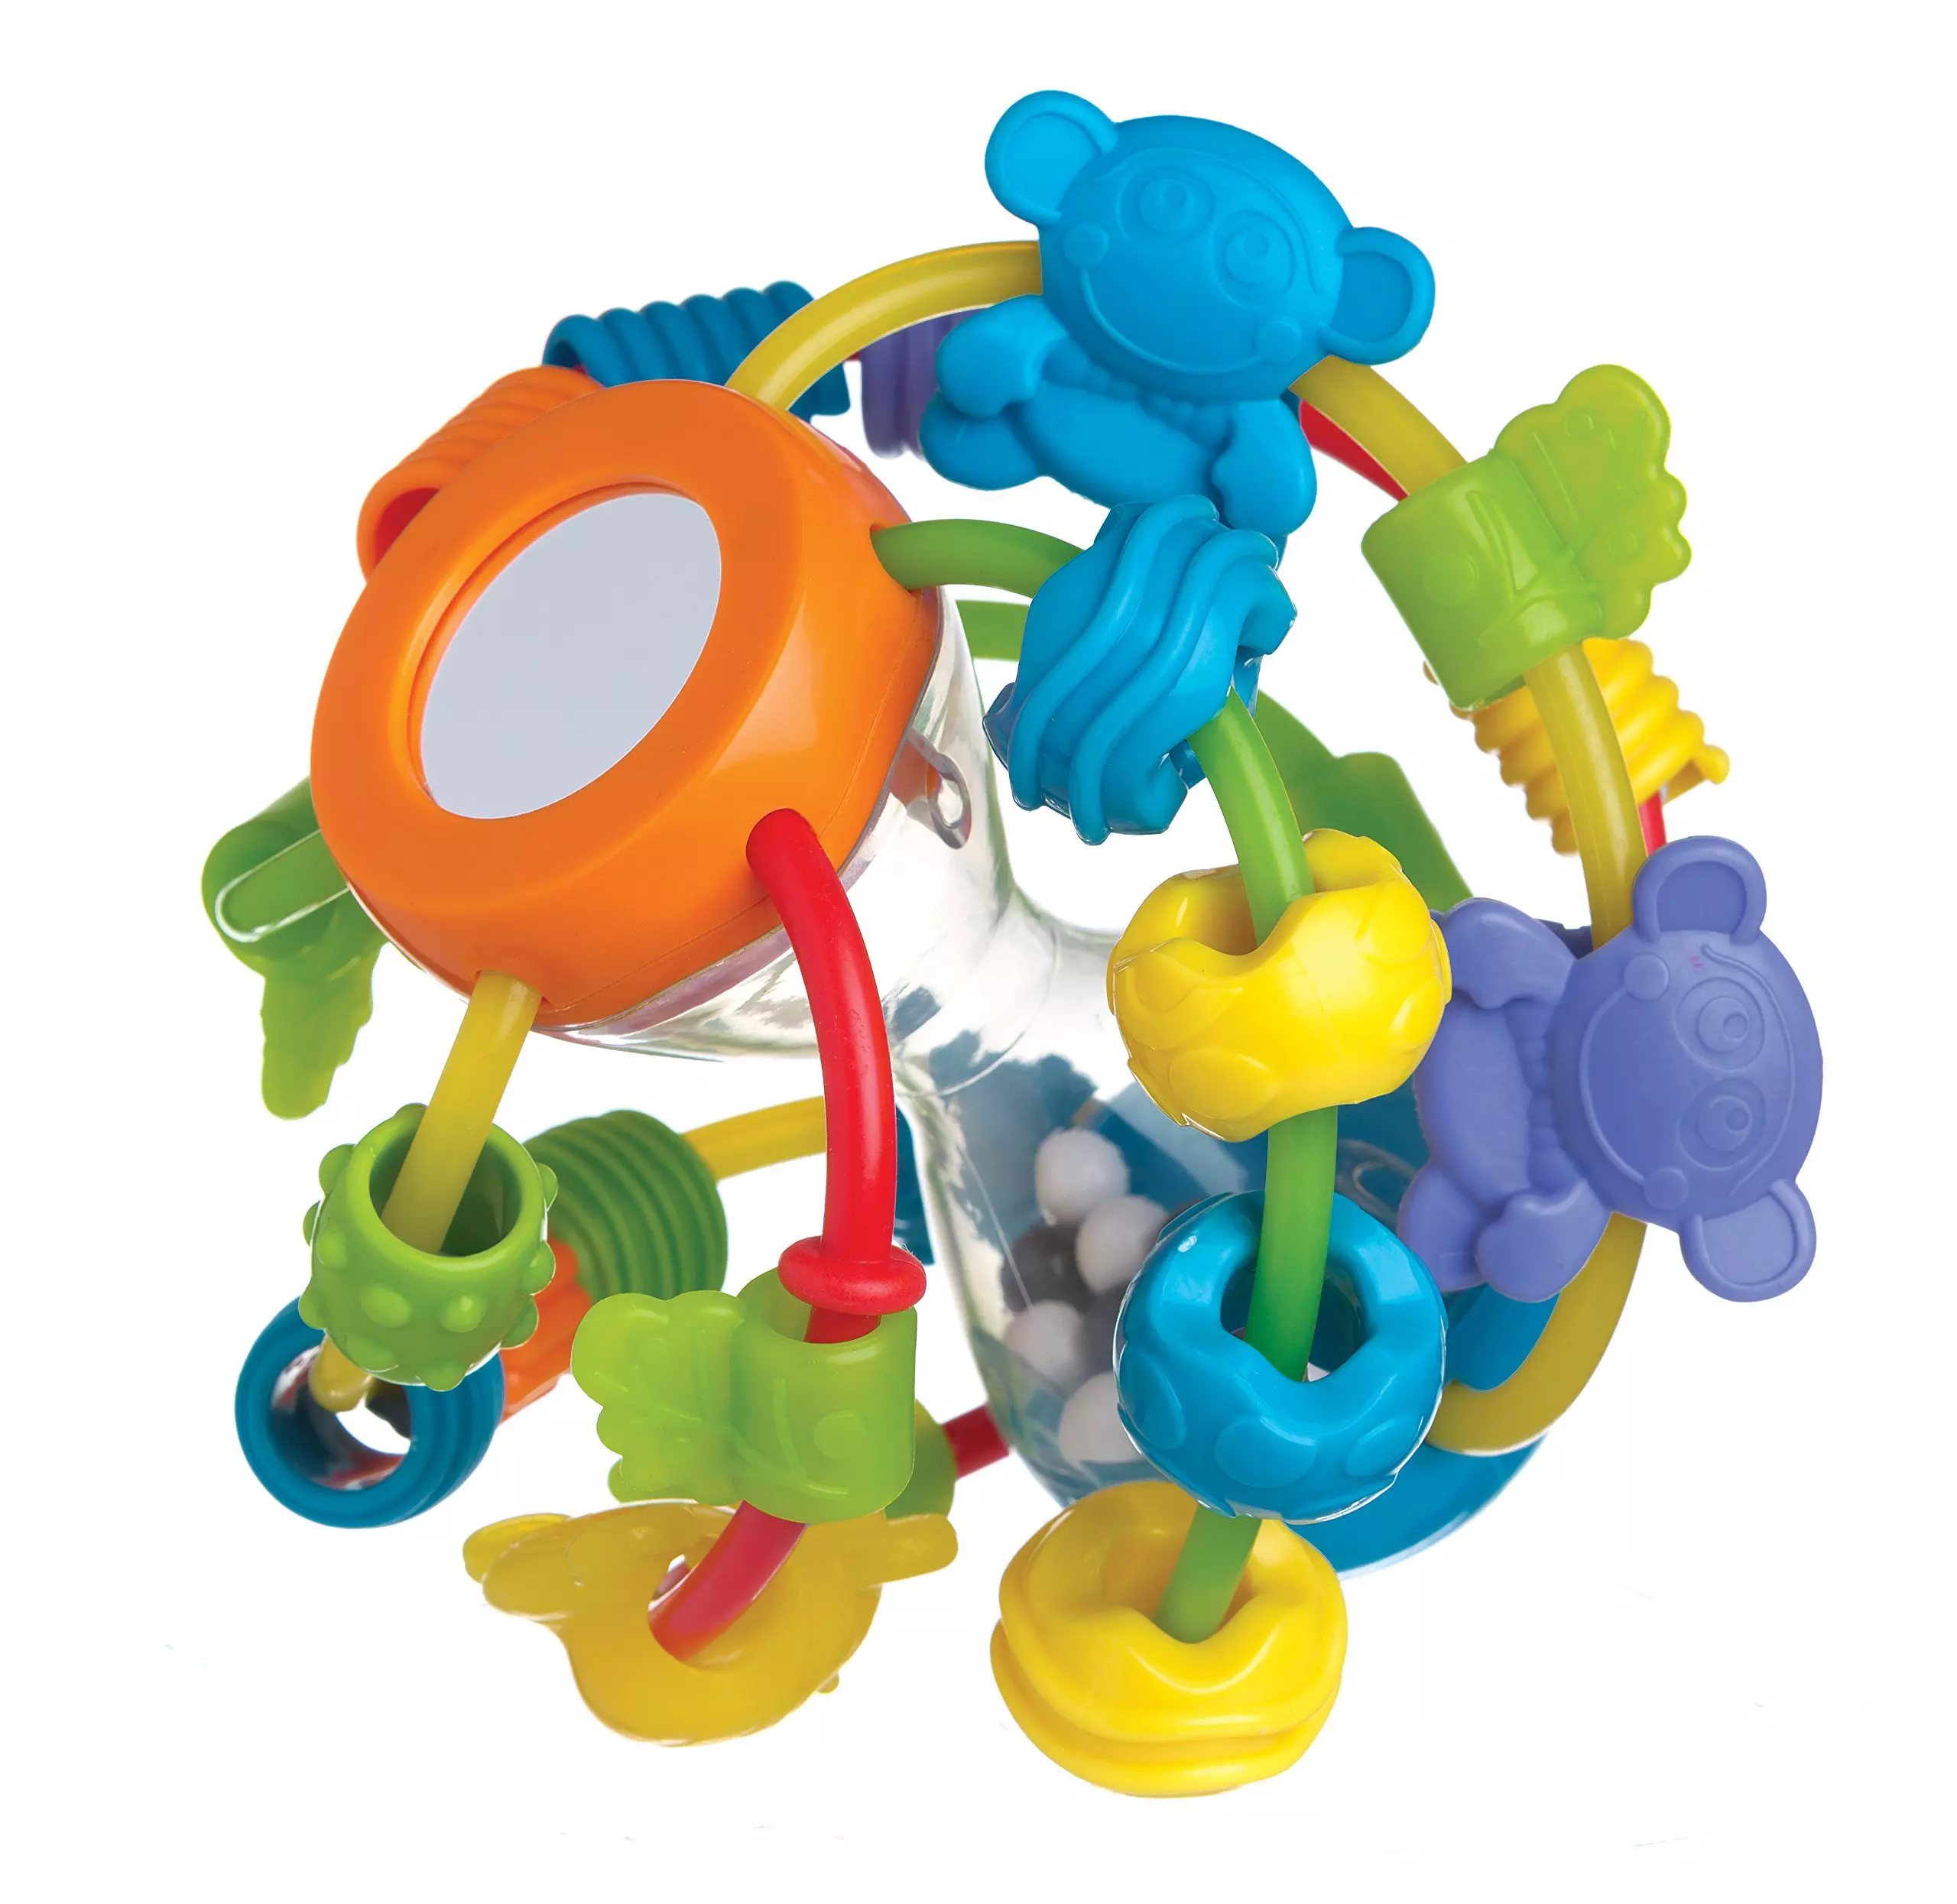 Playgro Play And Learn Ball